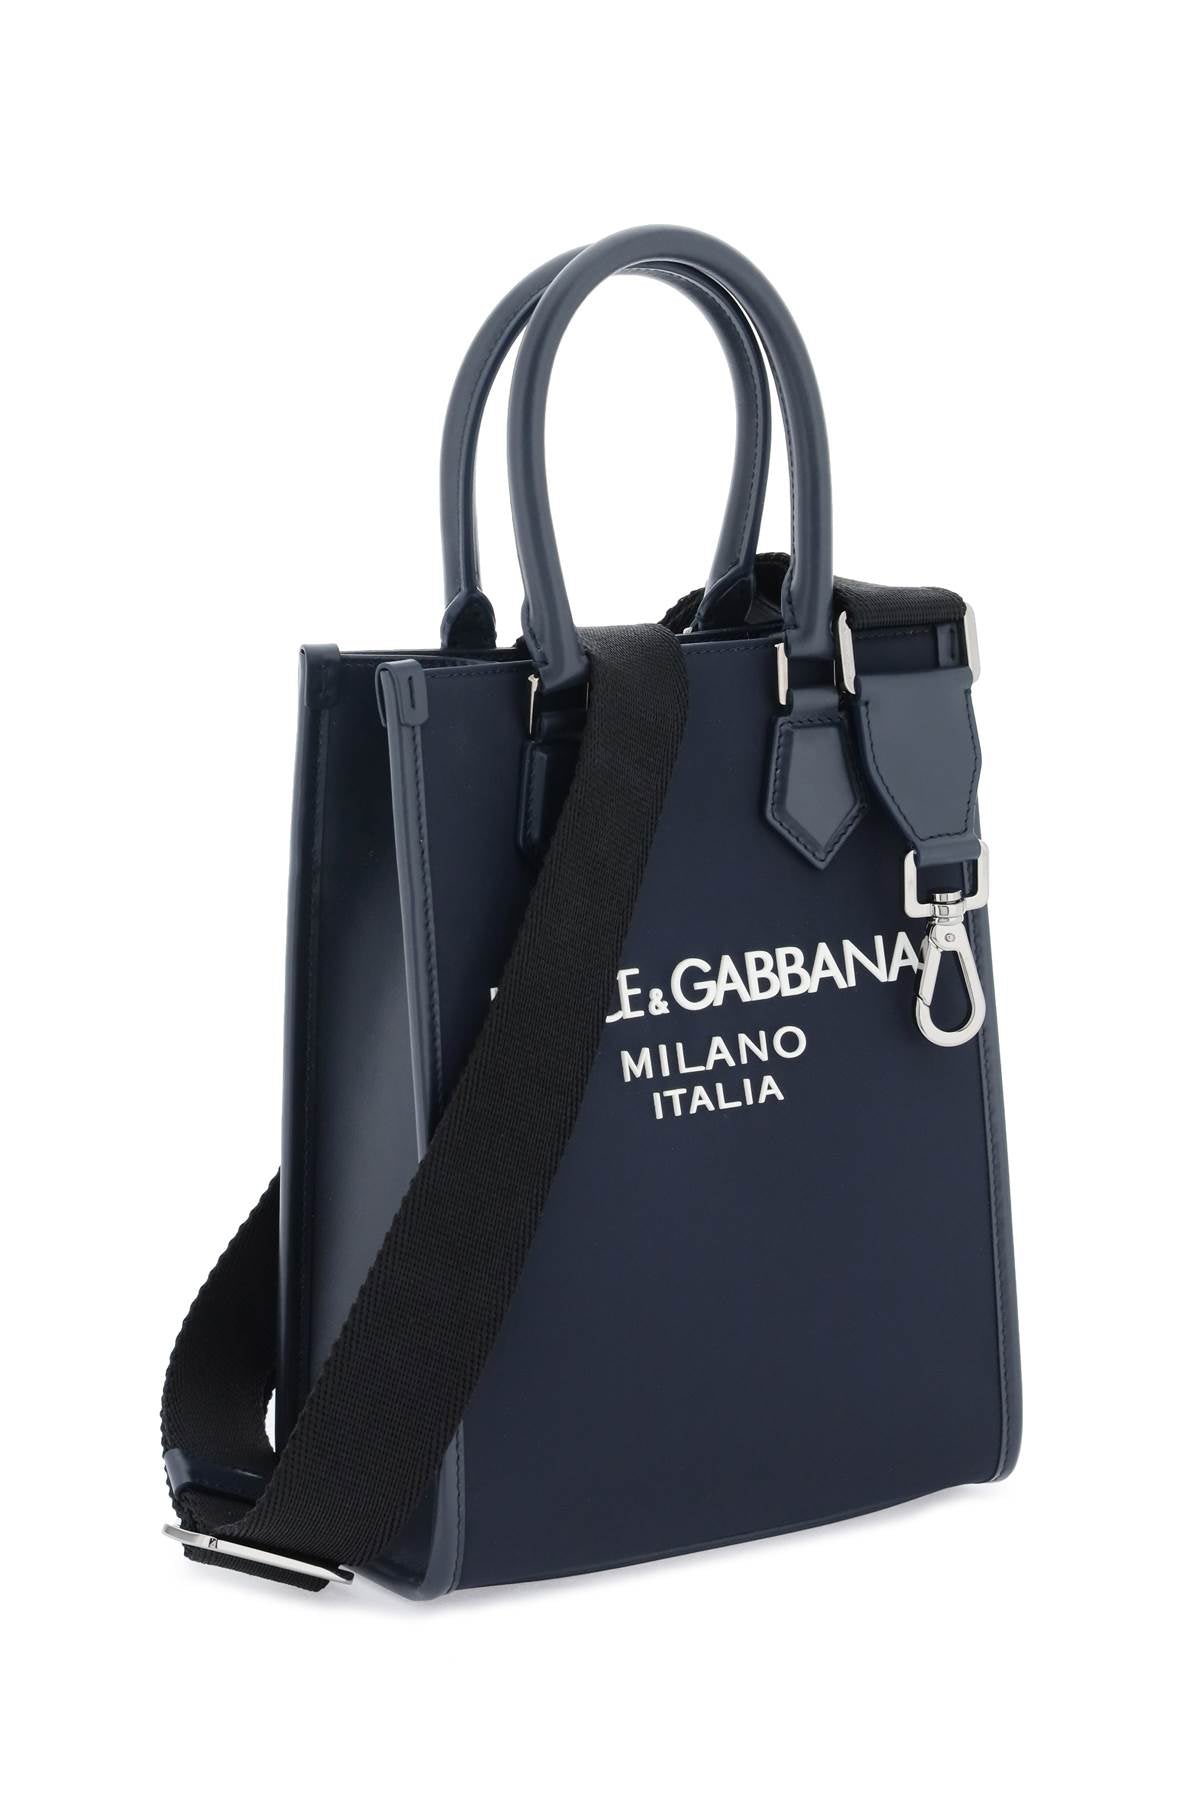 DOLCE & GABBANA Navy Small Nylon and Leather Trim Tote Bag with Rubberized Logo for Men